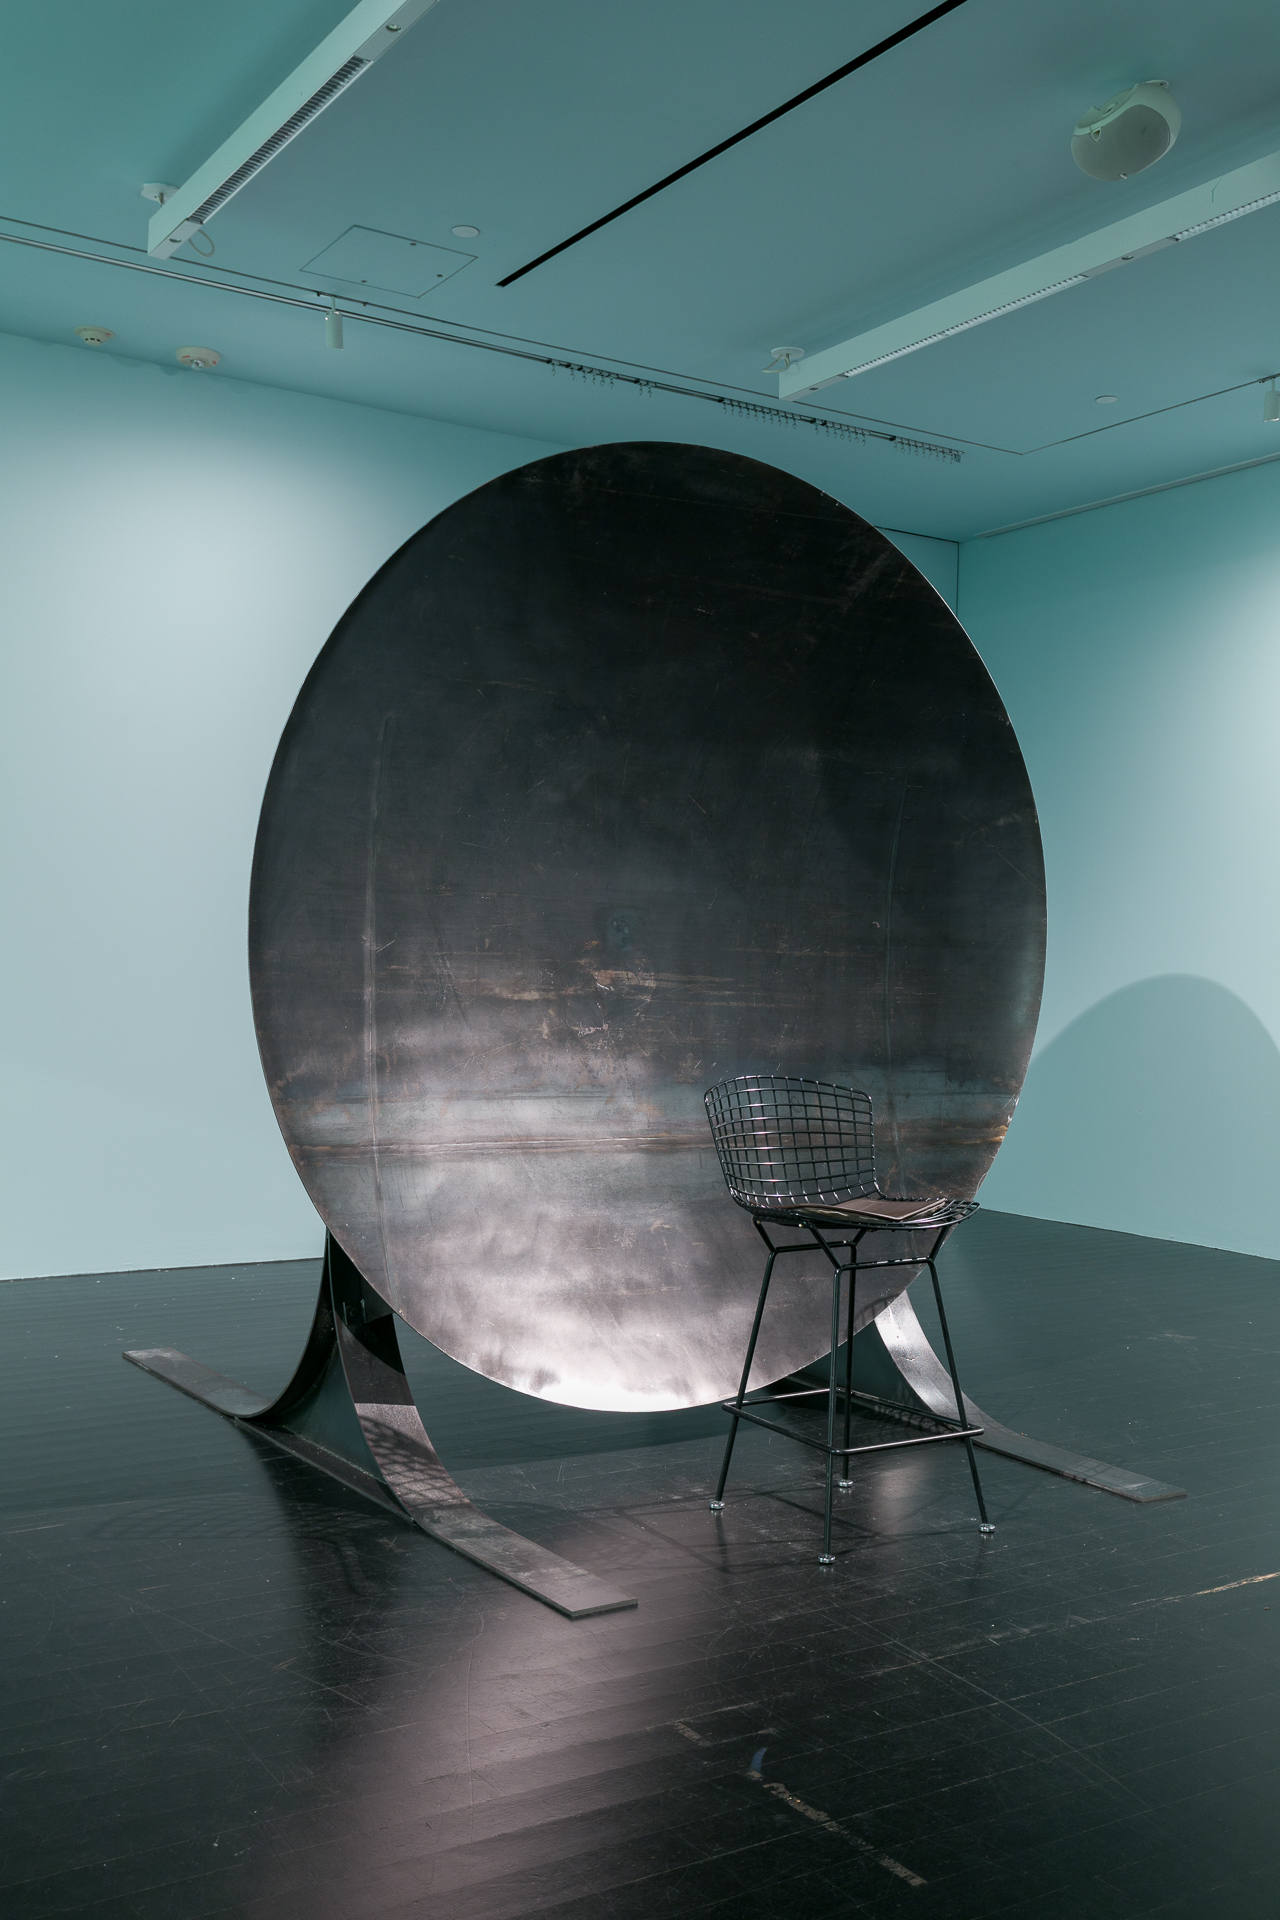 [Image description: An image of an art installation in a white gallery space. The work consists of two chairs, each sitting in front of their own large discs, which are meant to replicate the effects of an acoustic mirror. The discs reflect and focus sound waves in a way that visitors can sit far apart but will hear each other as if they are standing right next to each other.]